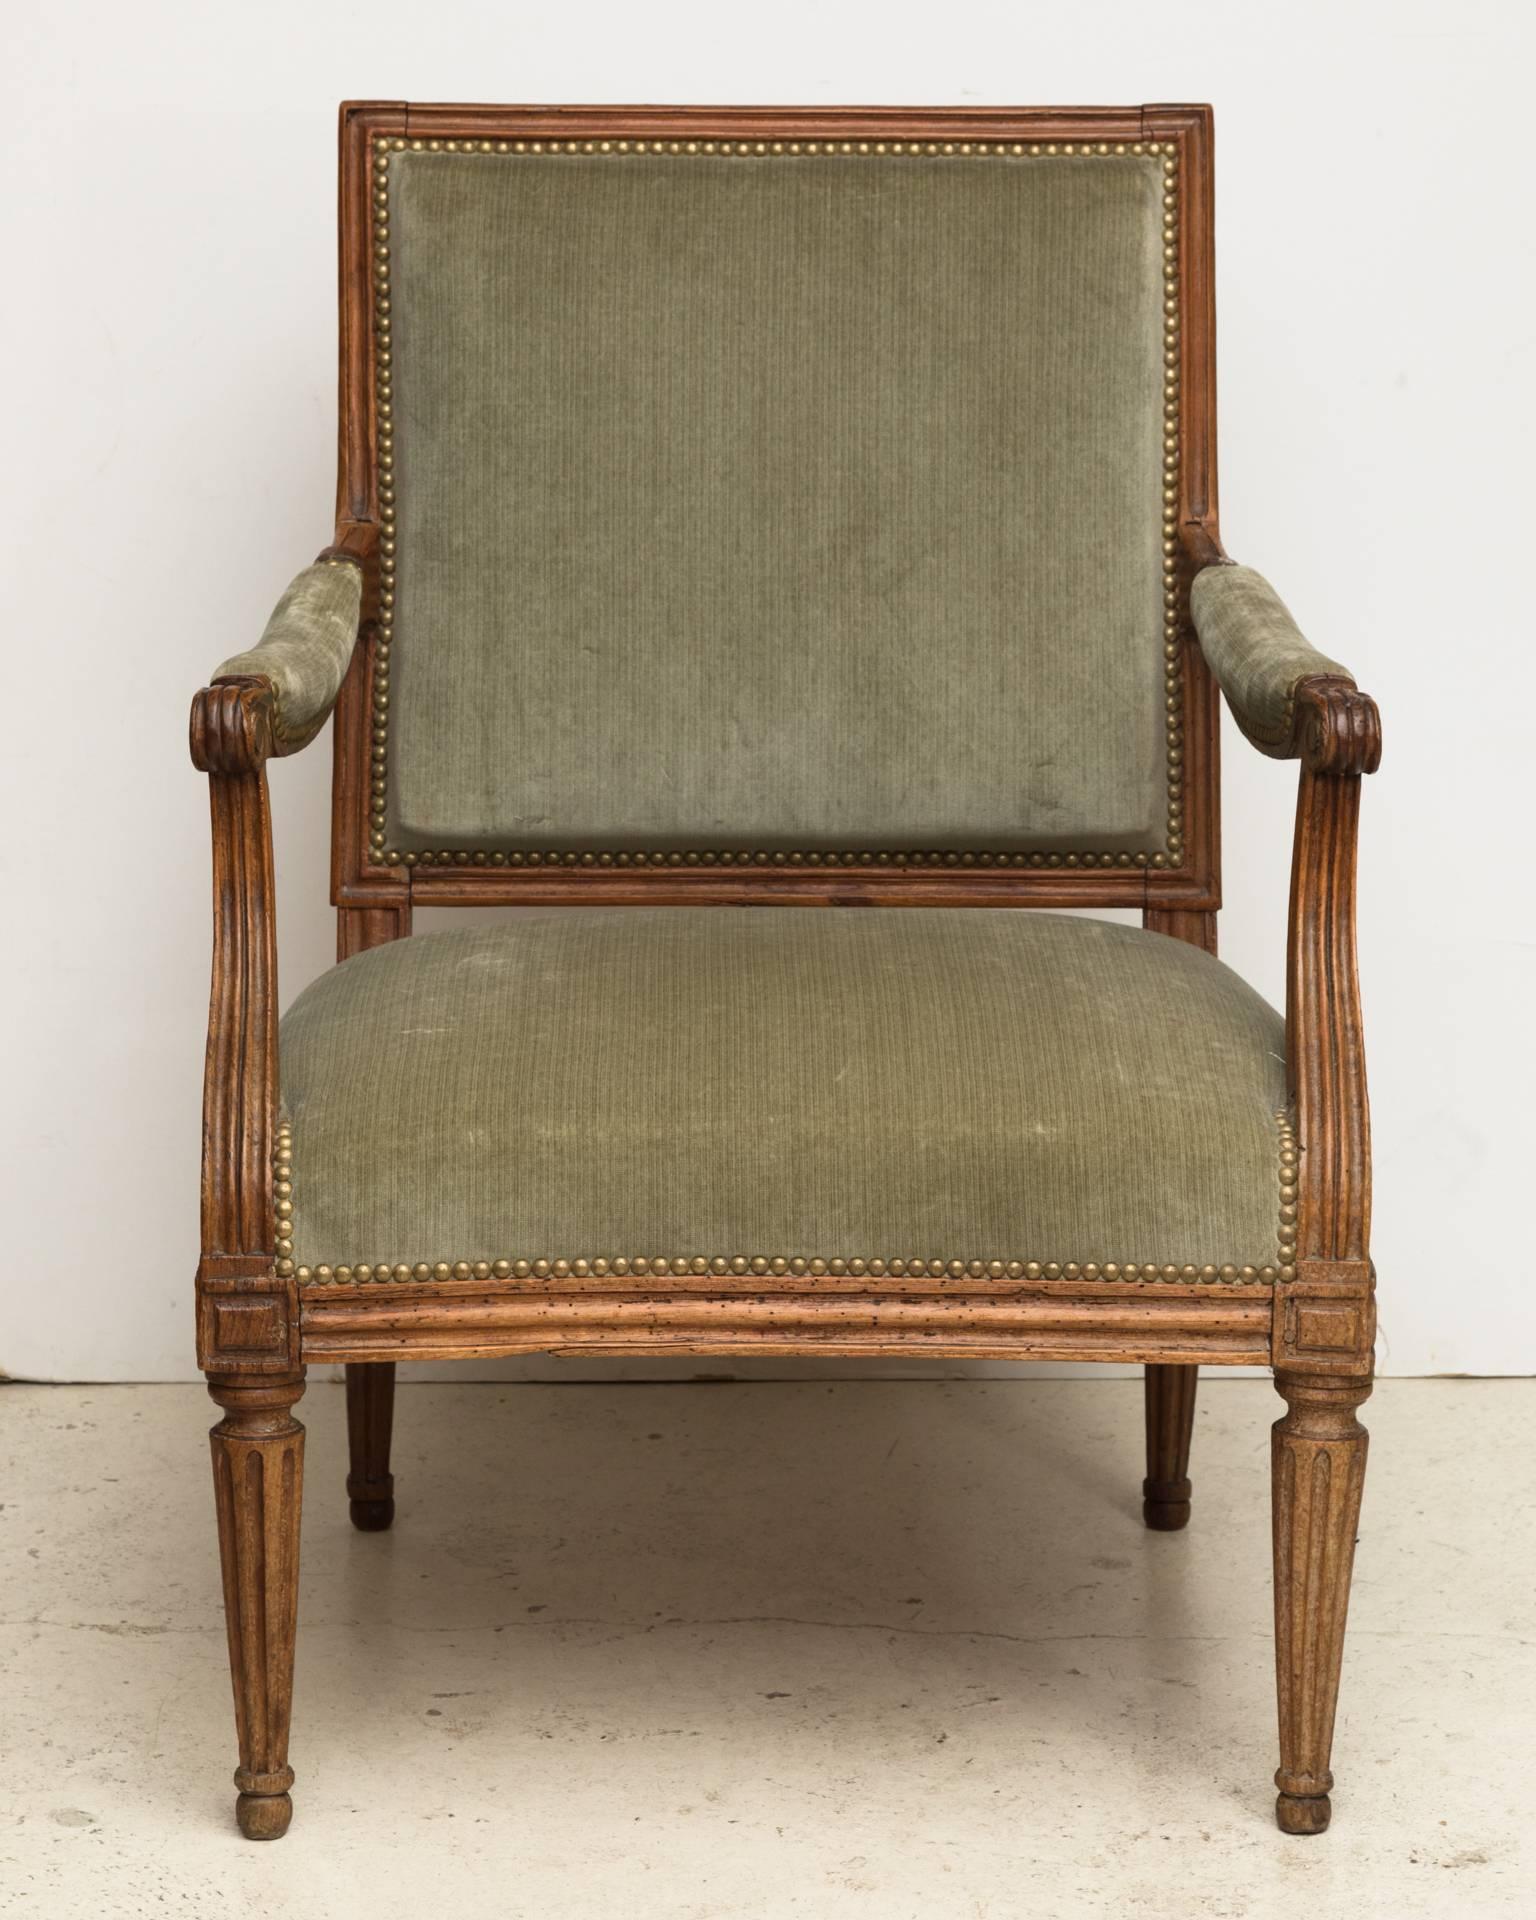 Beech frame square backed armchair with carved and fluted legs. Upholstered in sage green velvet.
Stamped by the maker, Pierre. Bernard: reçu maître on January 24th, 1766, coming from a family of ébènistes, specializing in the manufacture of